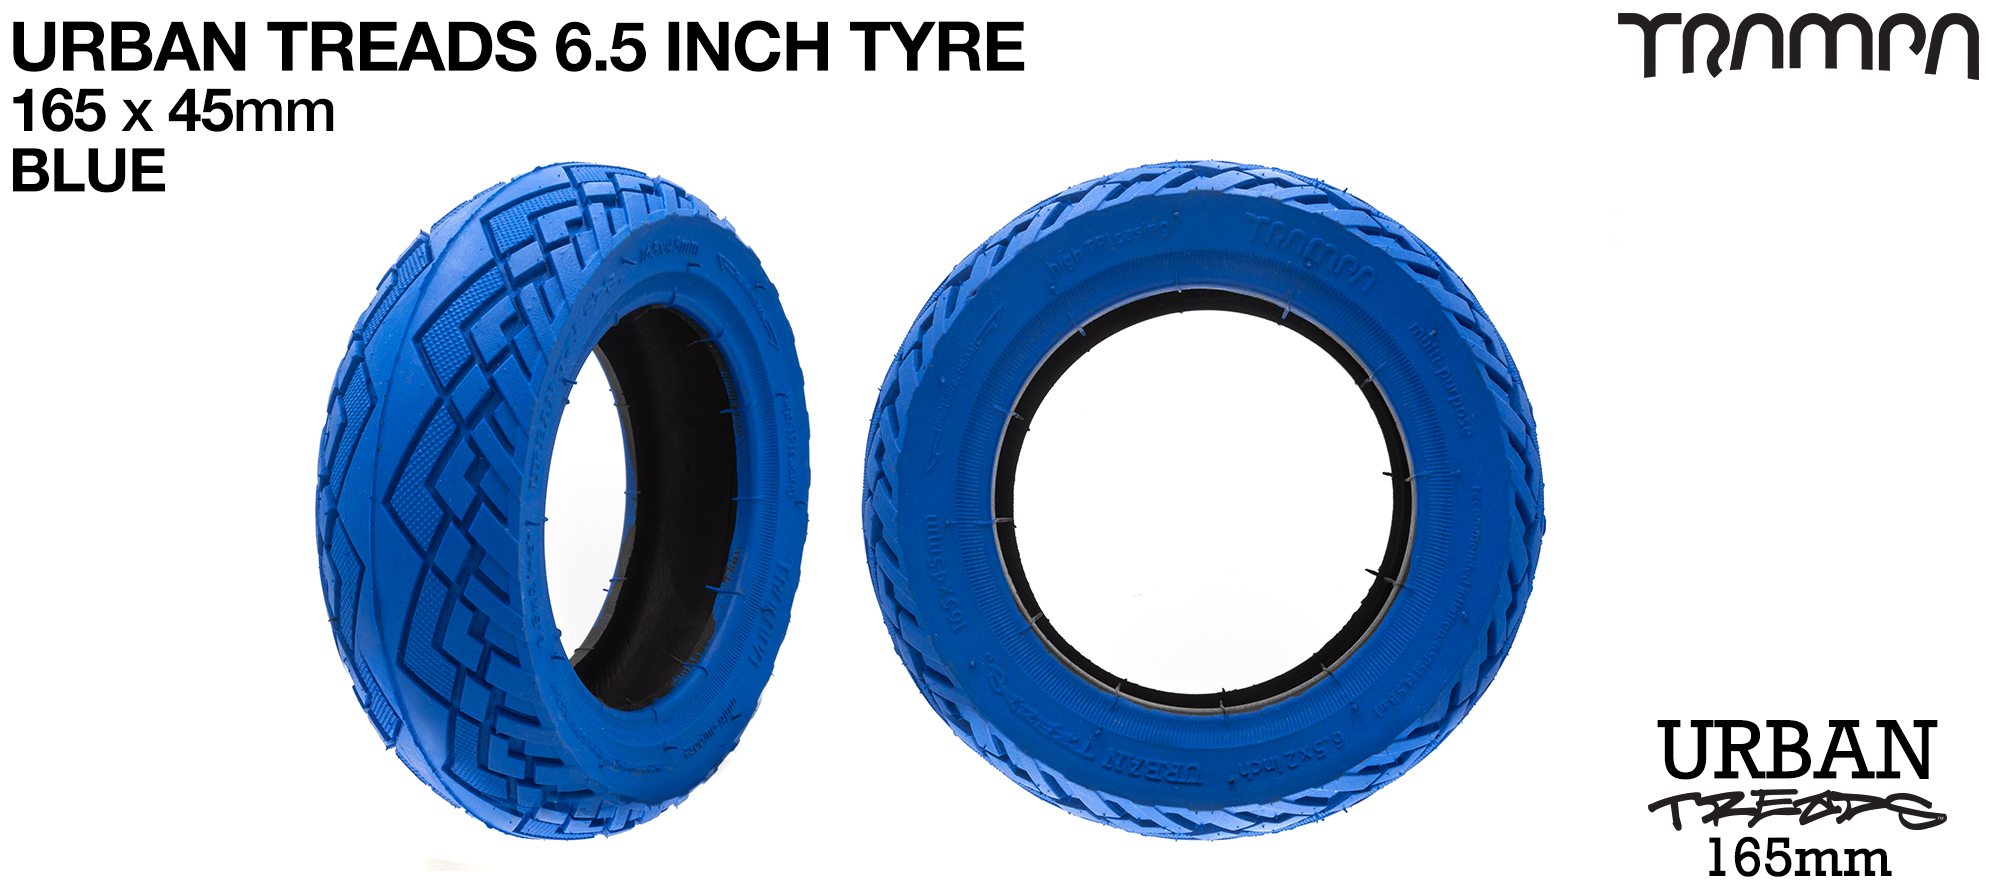 6 Inch Tyre TRAMPA URBAN TREADS is the perfect all round tyre for Urban & City riding - BLUE 